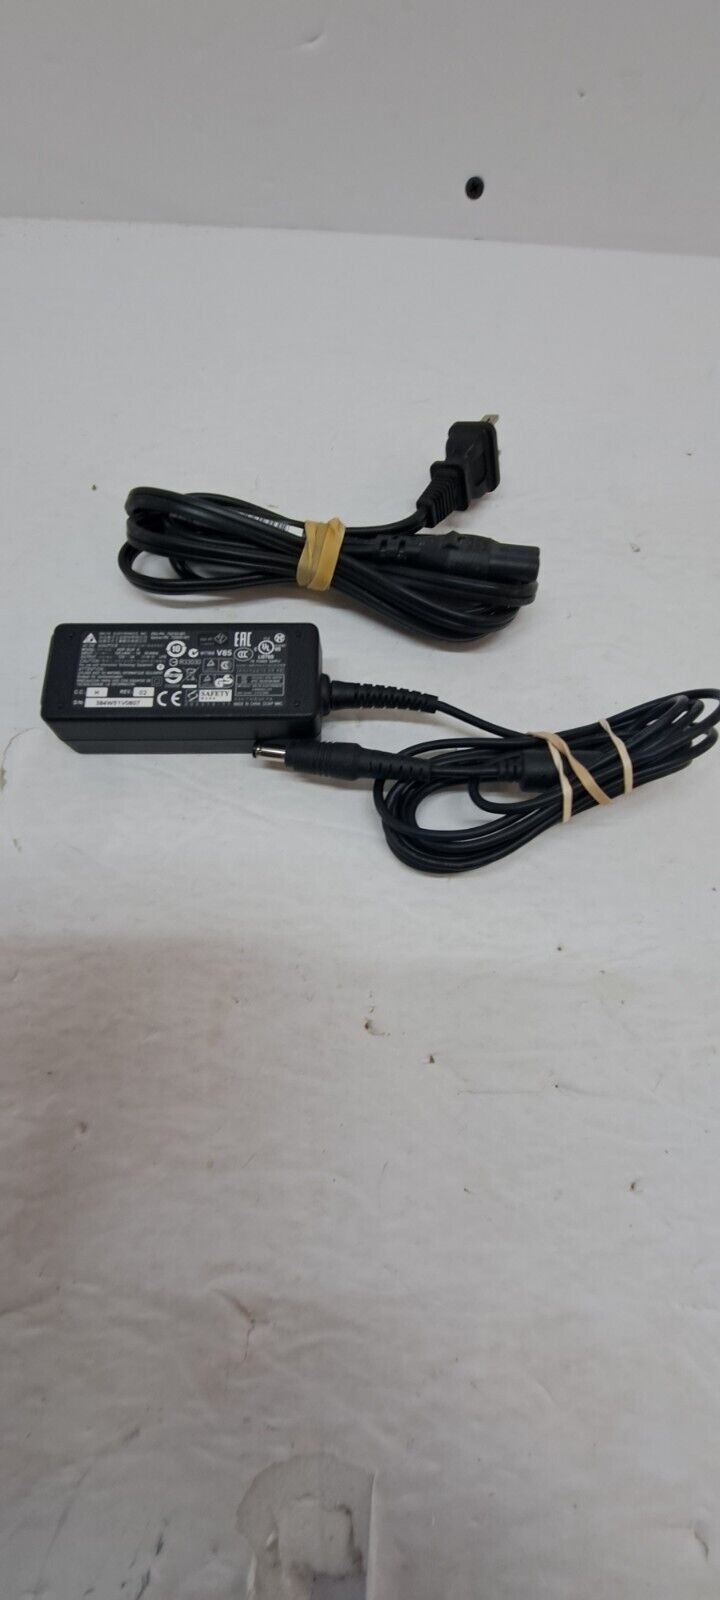 Genuine Delta Electronics ADP-36JH A 12V 3A AC DC Power Supply Adapter Cord